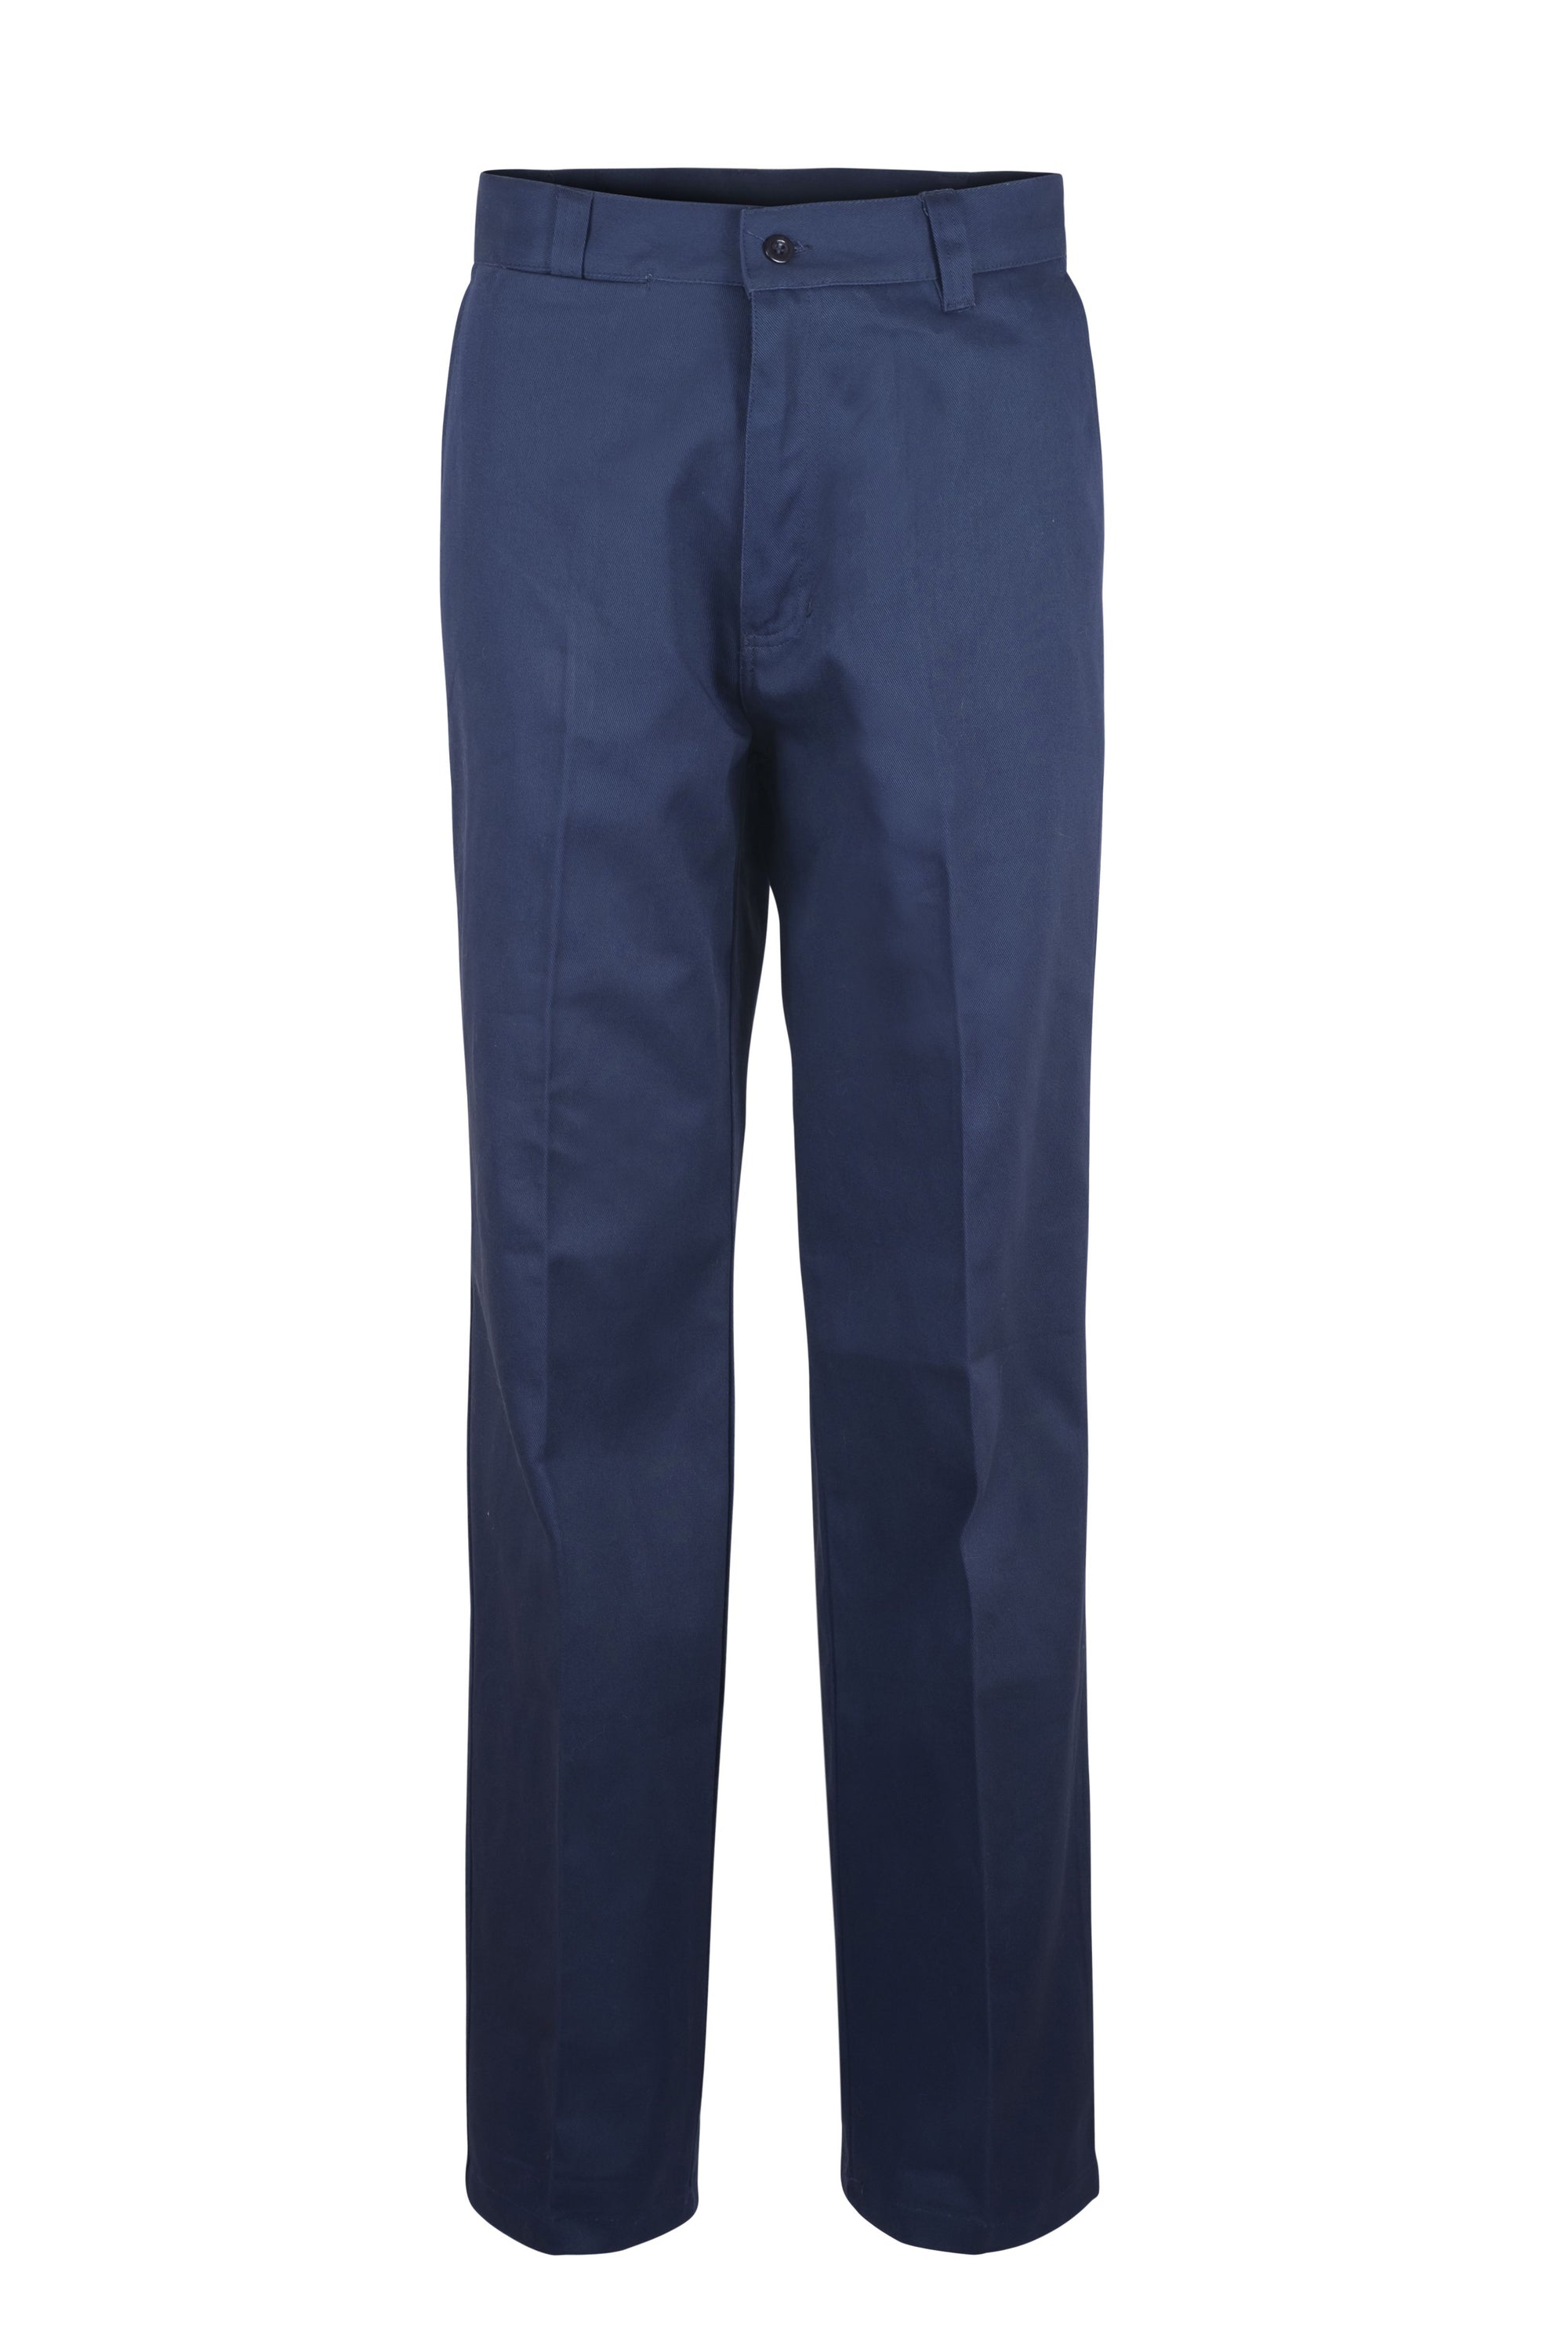 WorkCraft Mens Classic Flat Front Drill Pants 310g Navy 102R